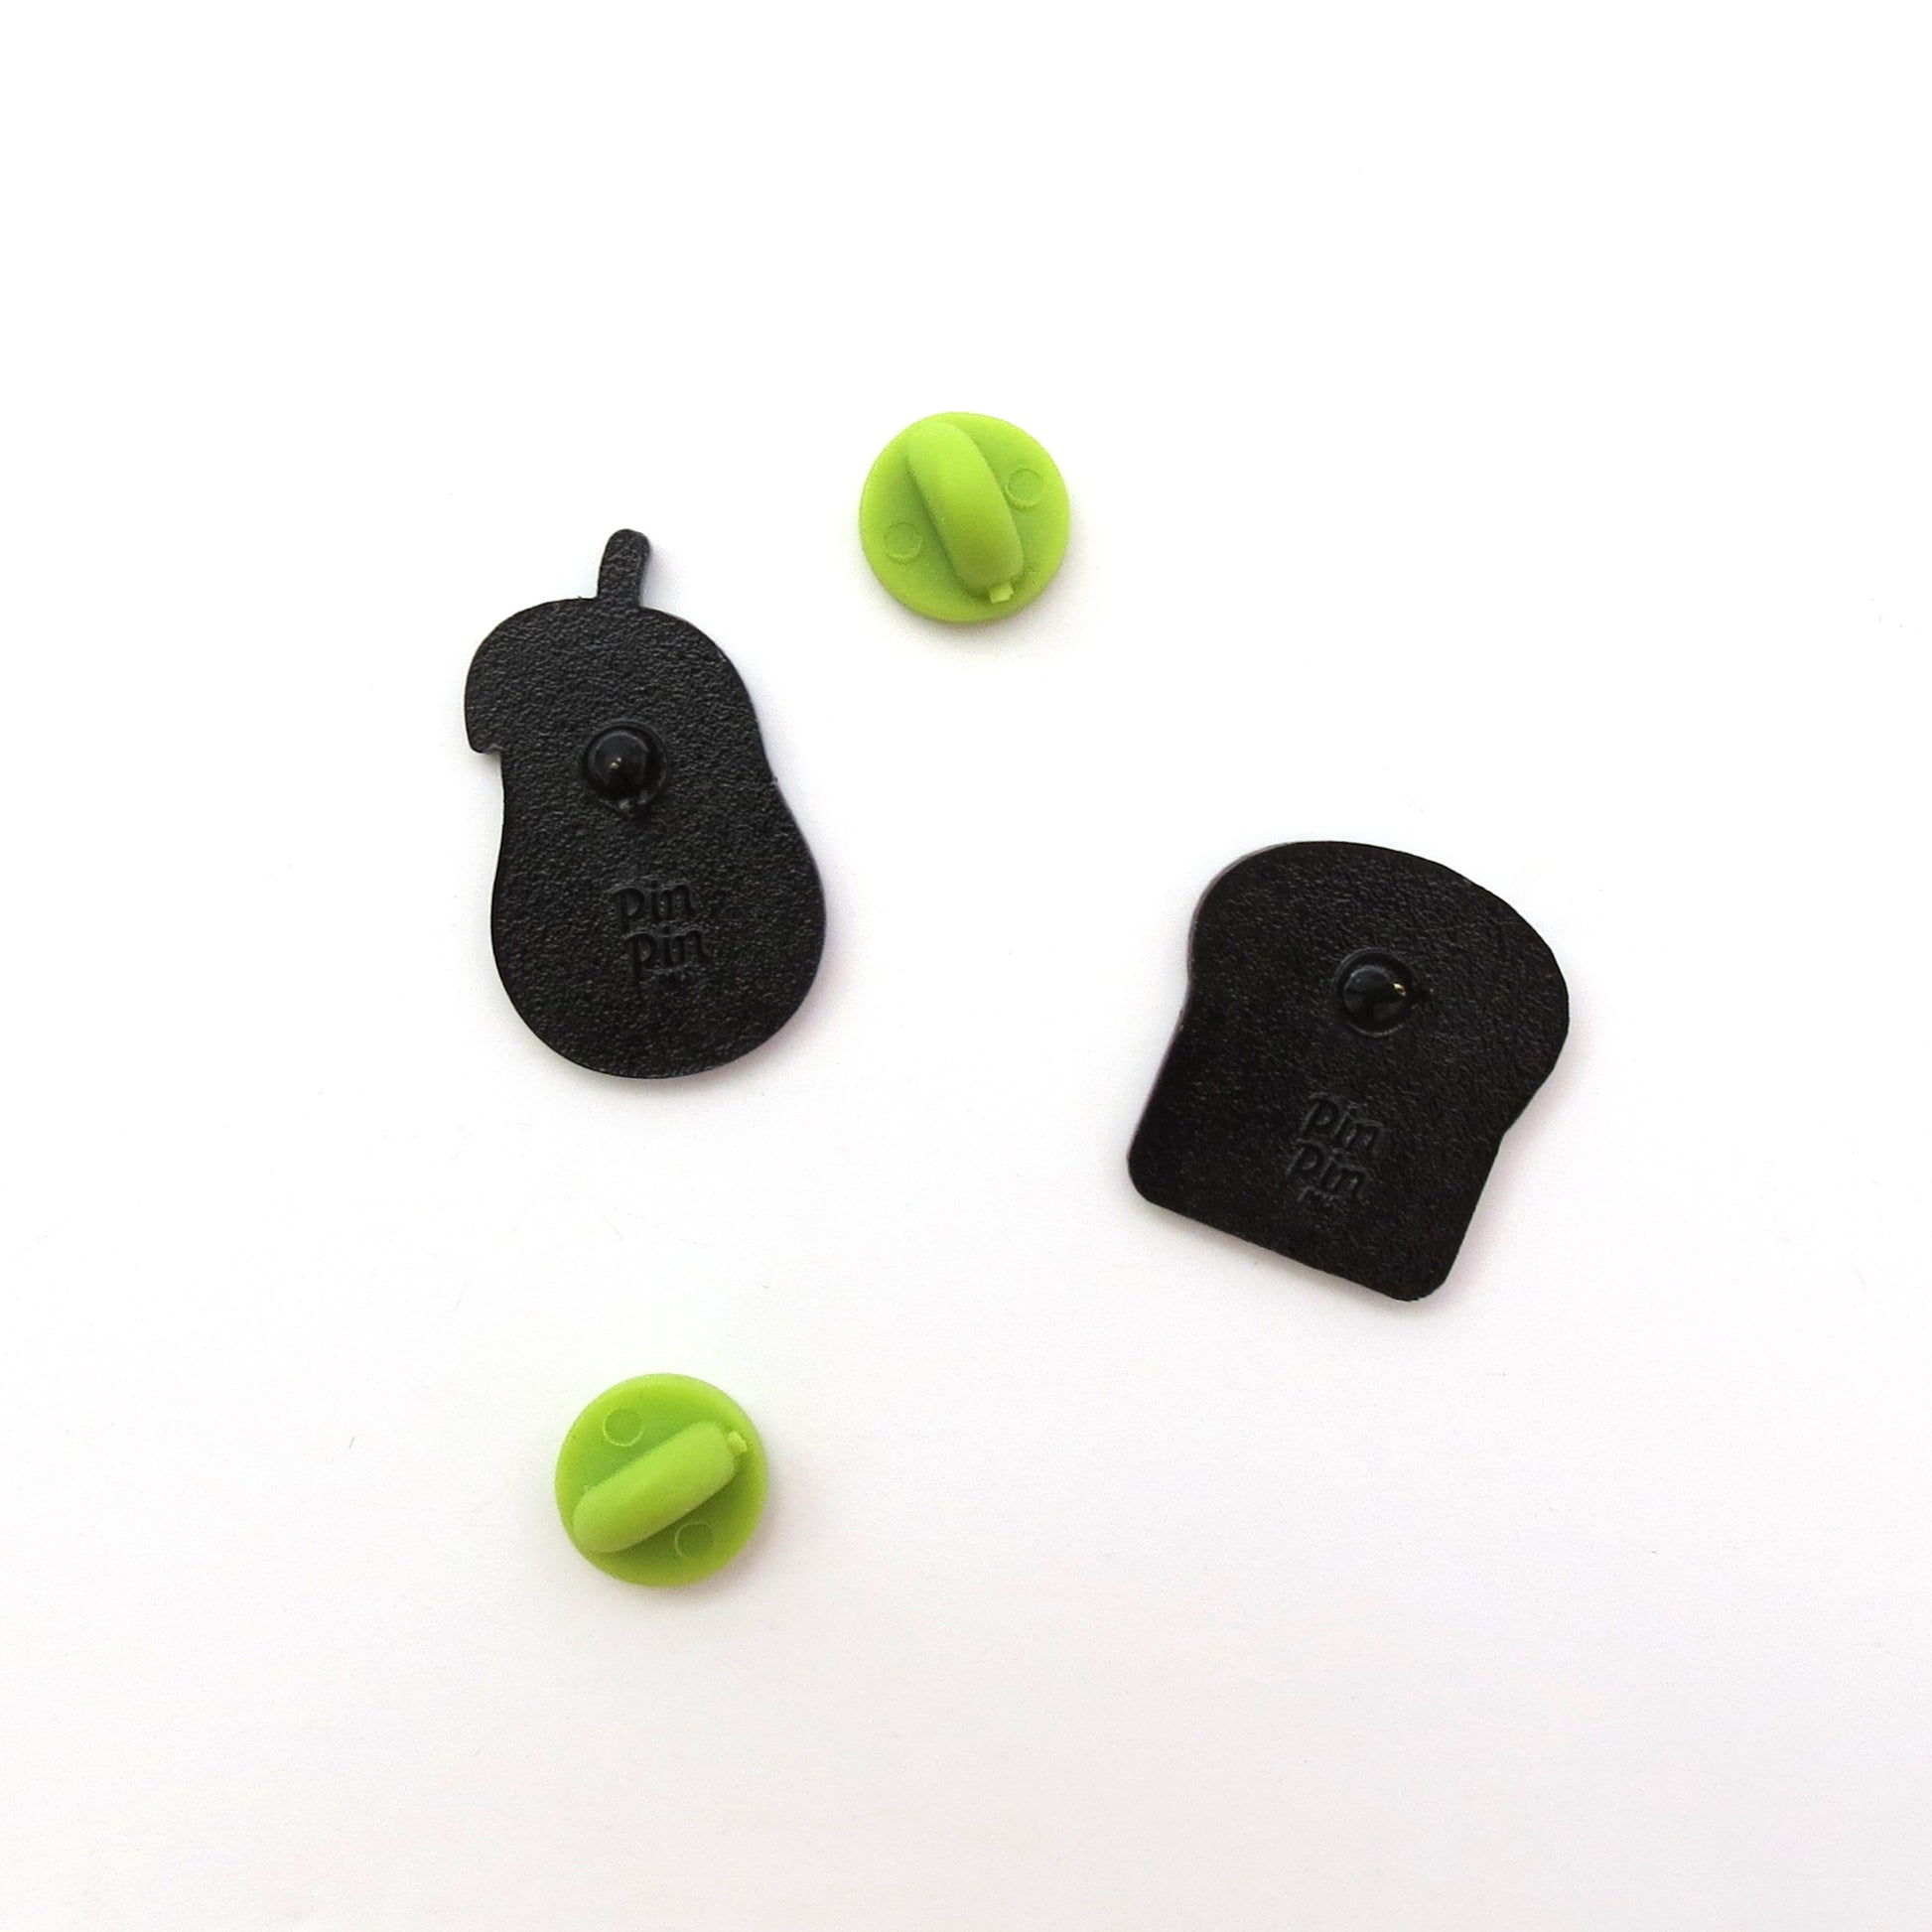 Showing back of Avocado and Toast enamel pin set with green rubber backings